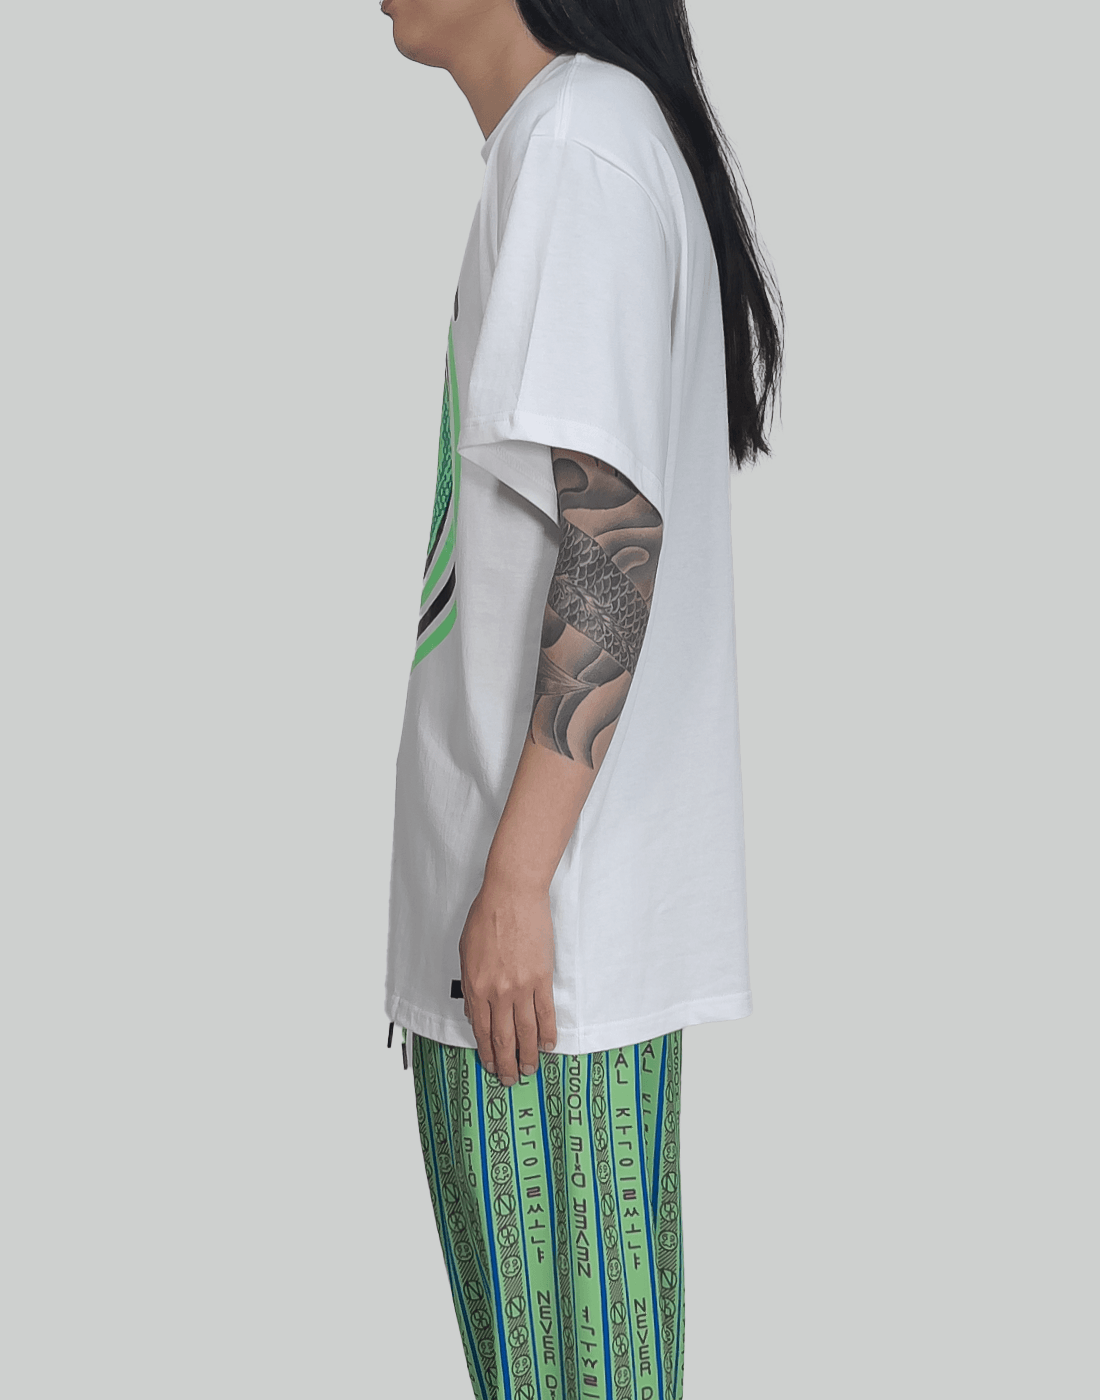 99%IS- Spiral "Fine! Apple" Meshed Eyes T-shirt - 082plus